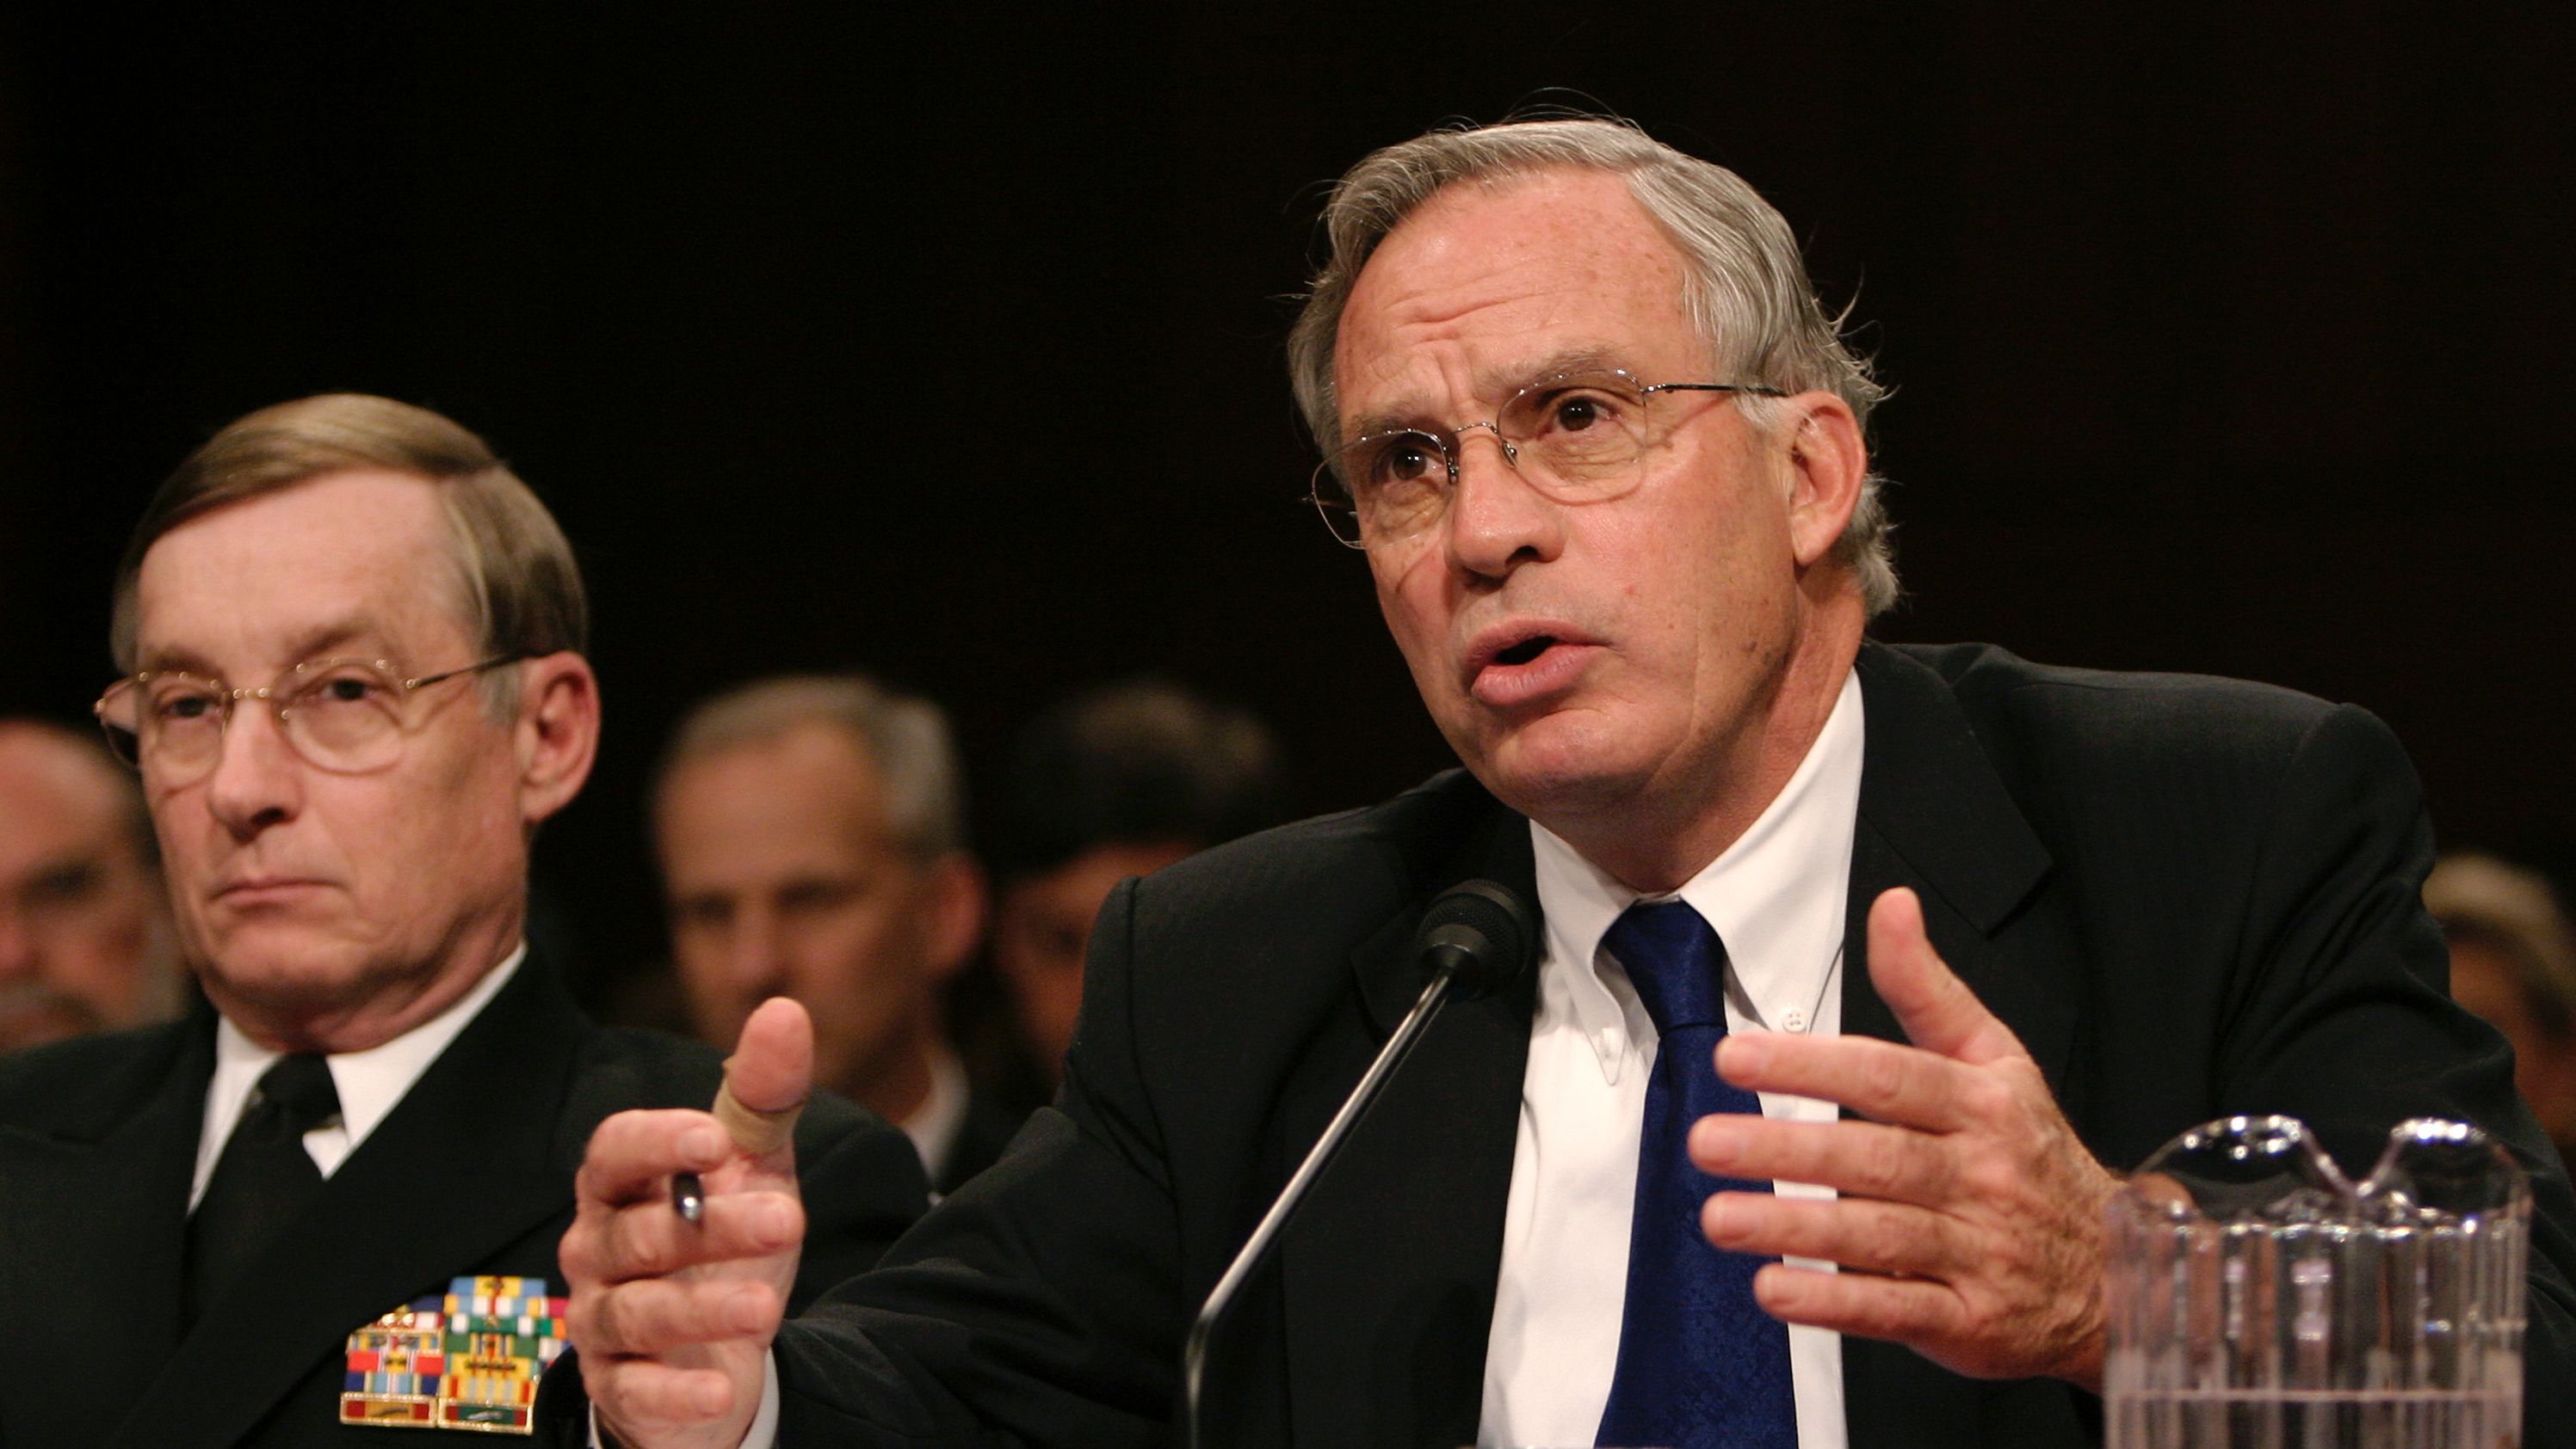 CIA Director Porter Goss (R) testifies before the Senate Select Intelligence Committee as Defense Intelligence Agency Director Lowell Jacoby (L) looks on at the Hart Senate Office Building on Capitol Hill February 16, 2005, in Washington, DC. (Photo by Shaun Heasley/Getty Images)